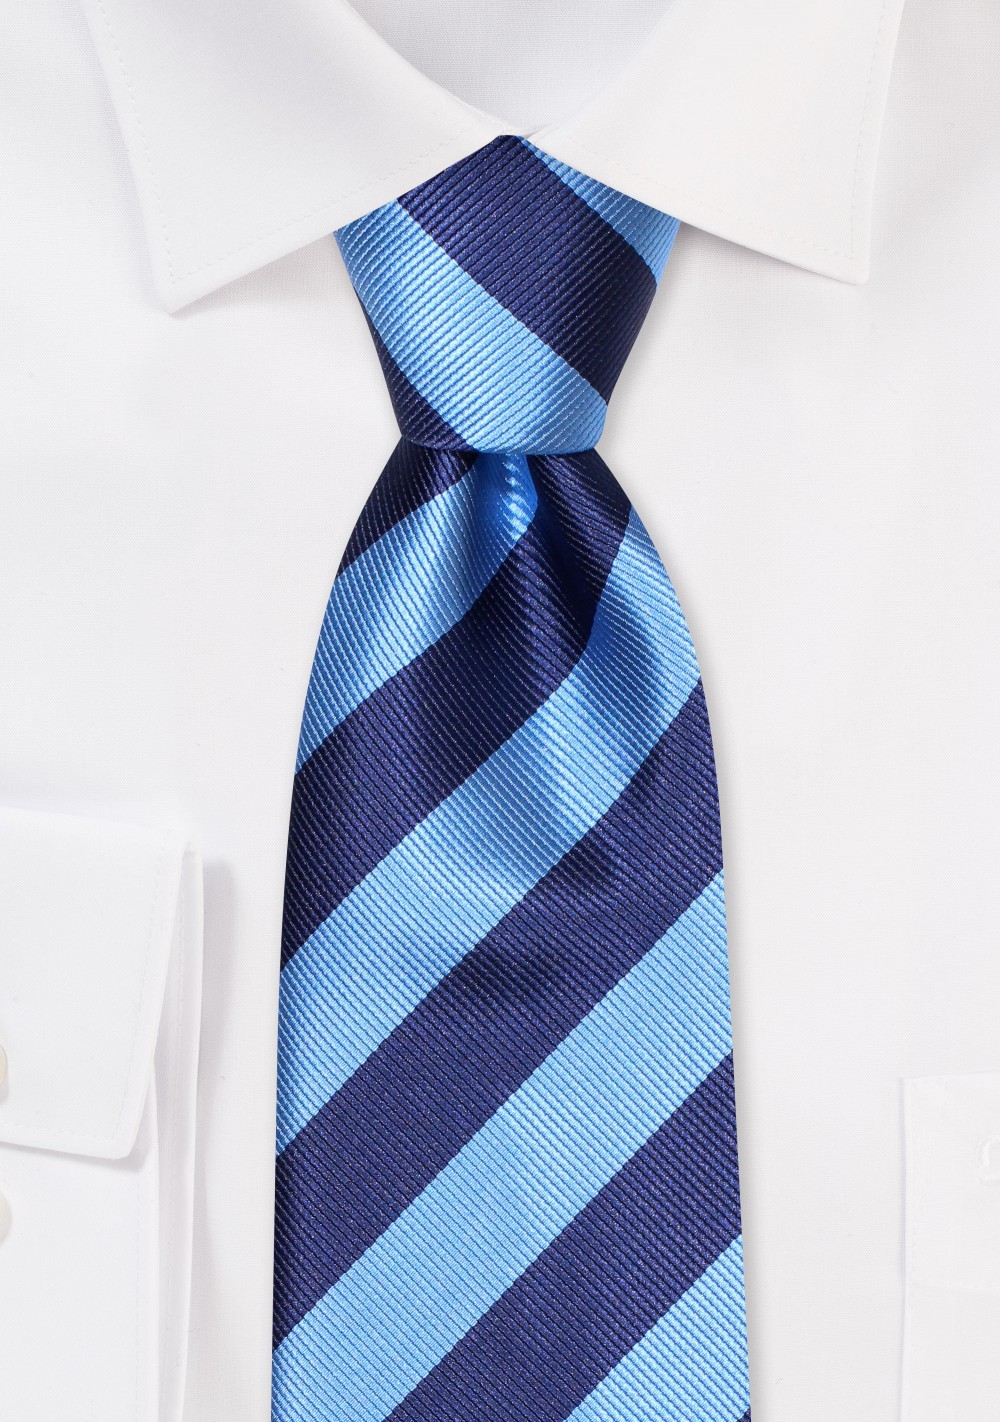 Classic Repp Tie in Sky Blue and Navy